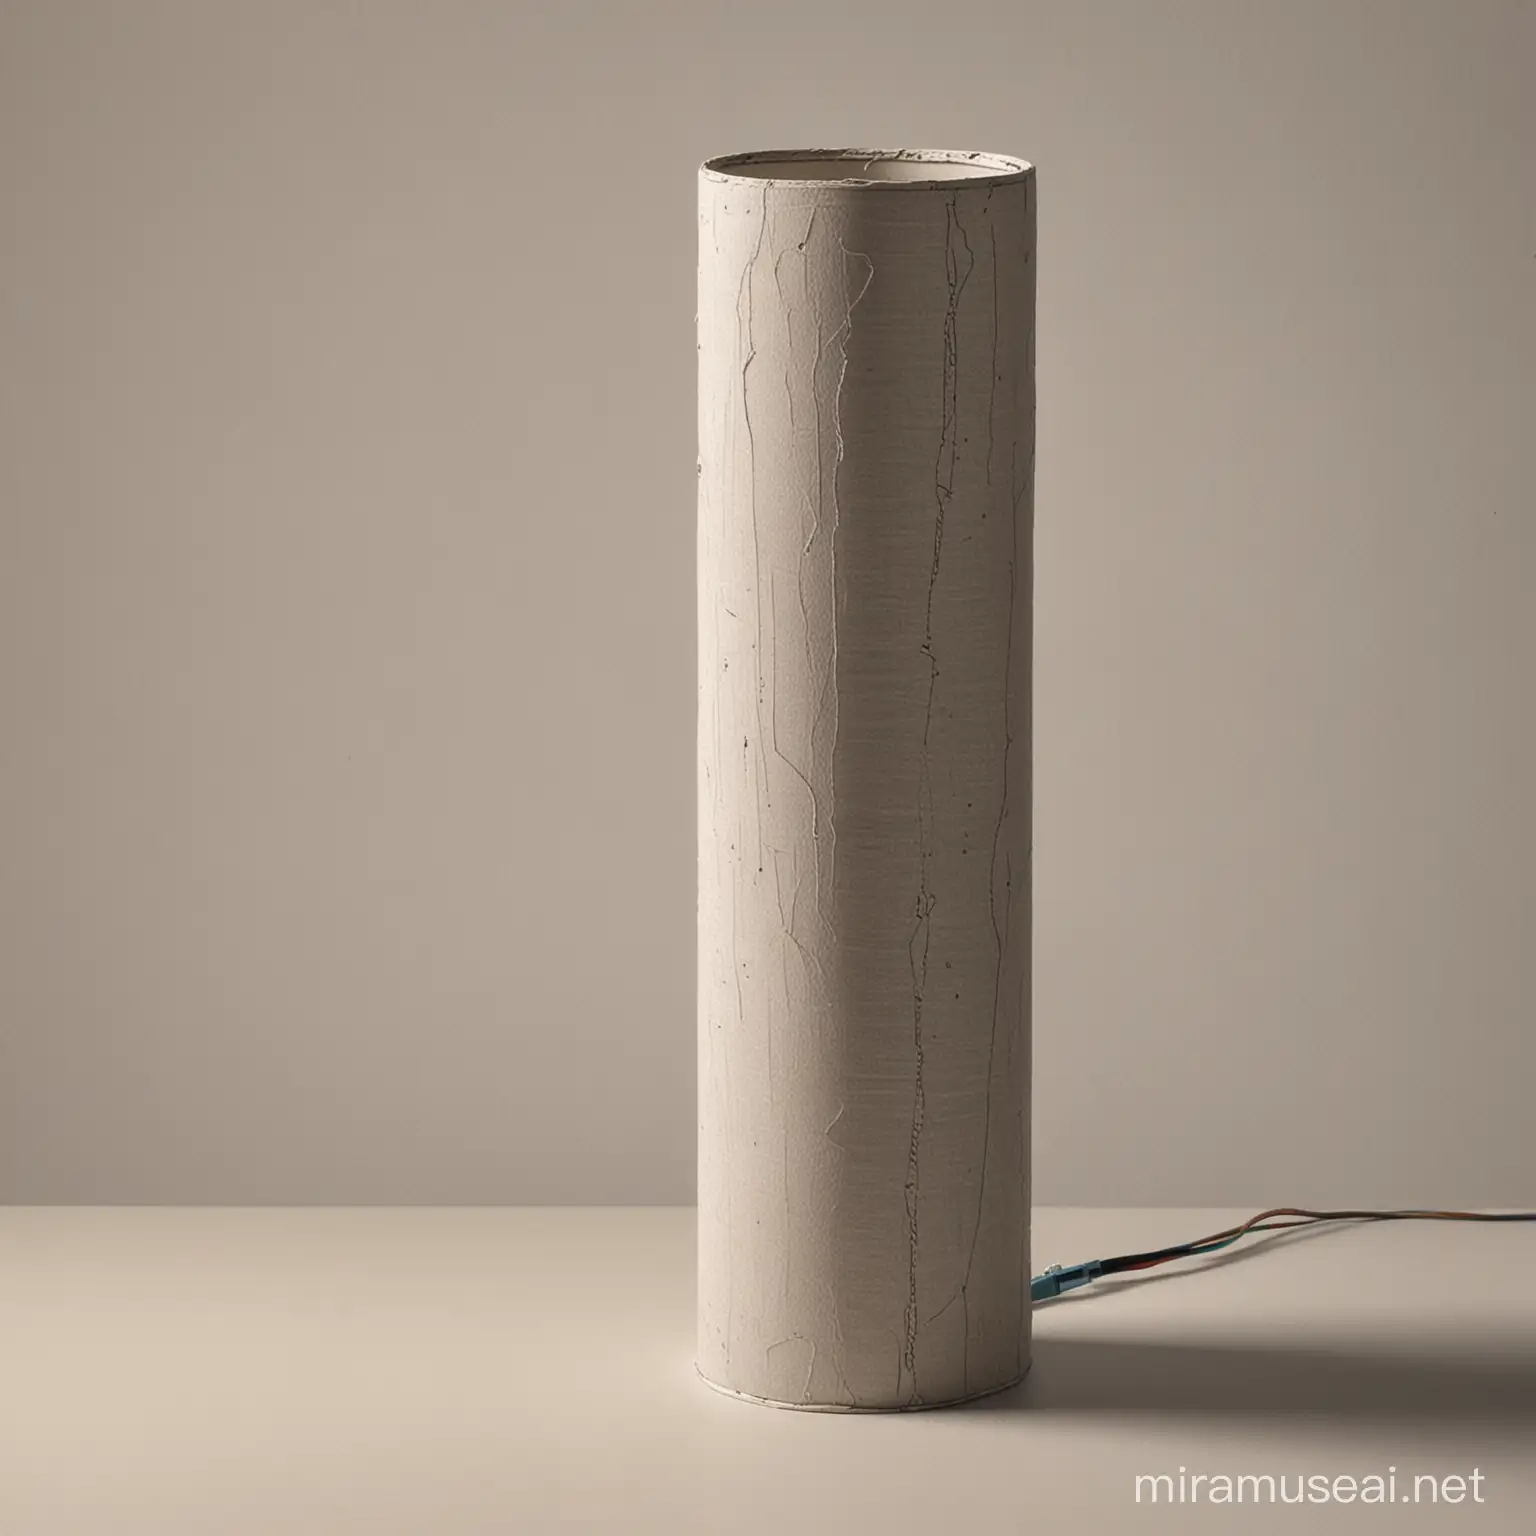 Start by drawing a cylindrical base for the lamp, representing the recycled materials.
Above the base, draw a slender, elongated cylindrical body to represent the lamp's structure.